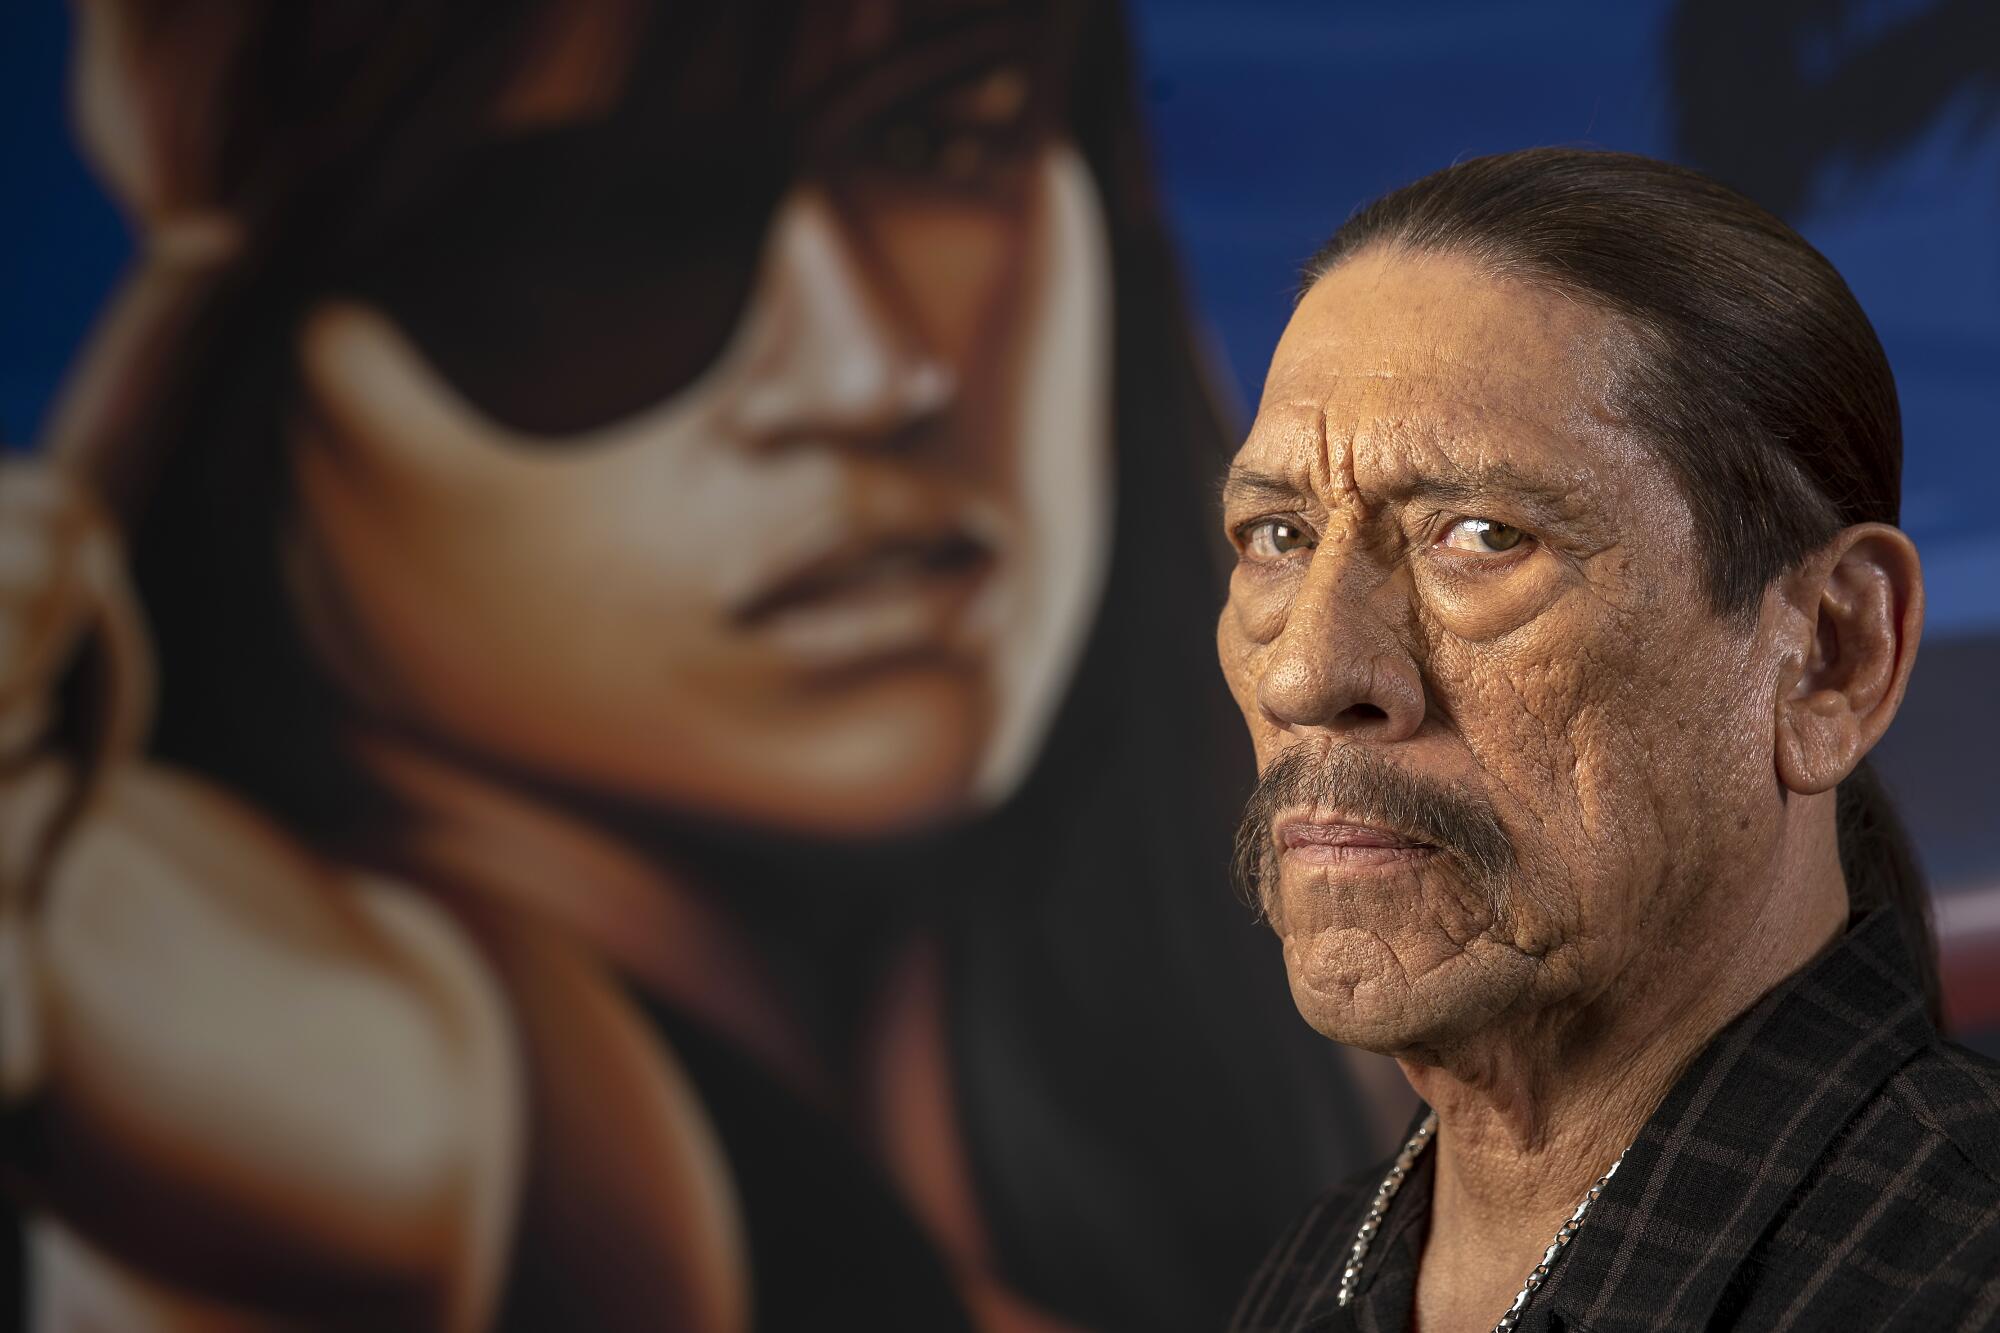 Danny Trejo in front of an image of a person with a black eye patch